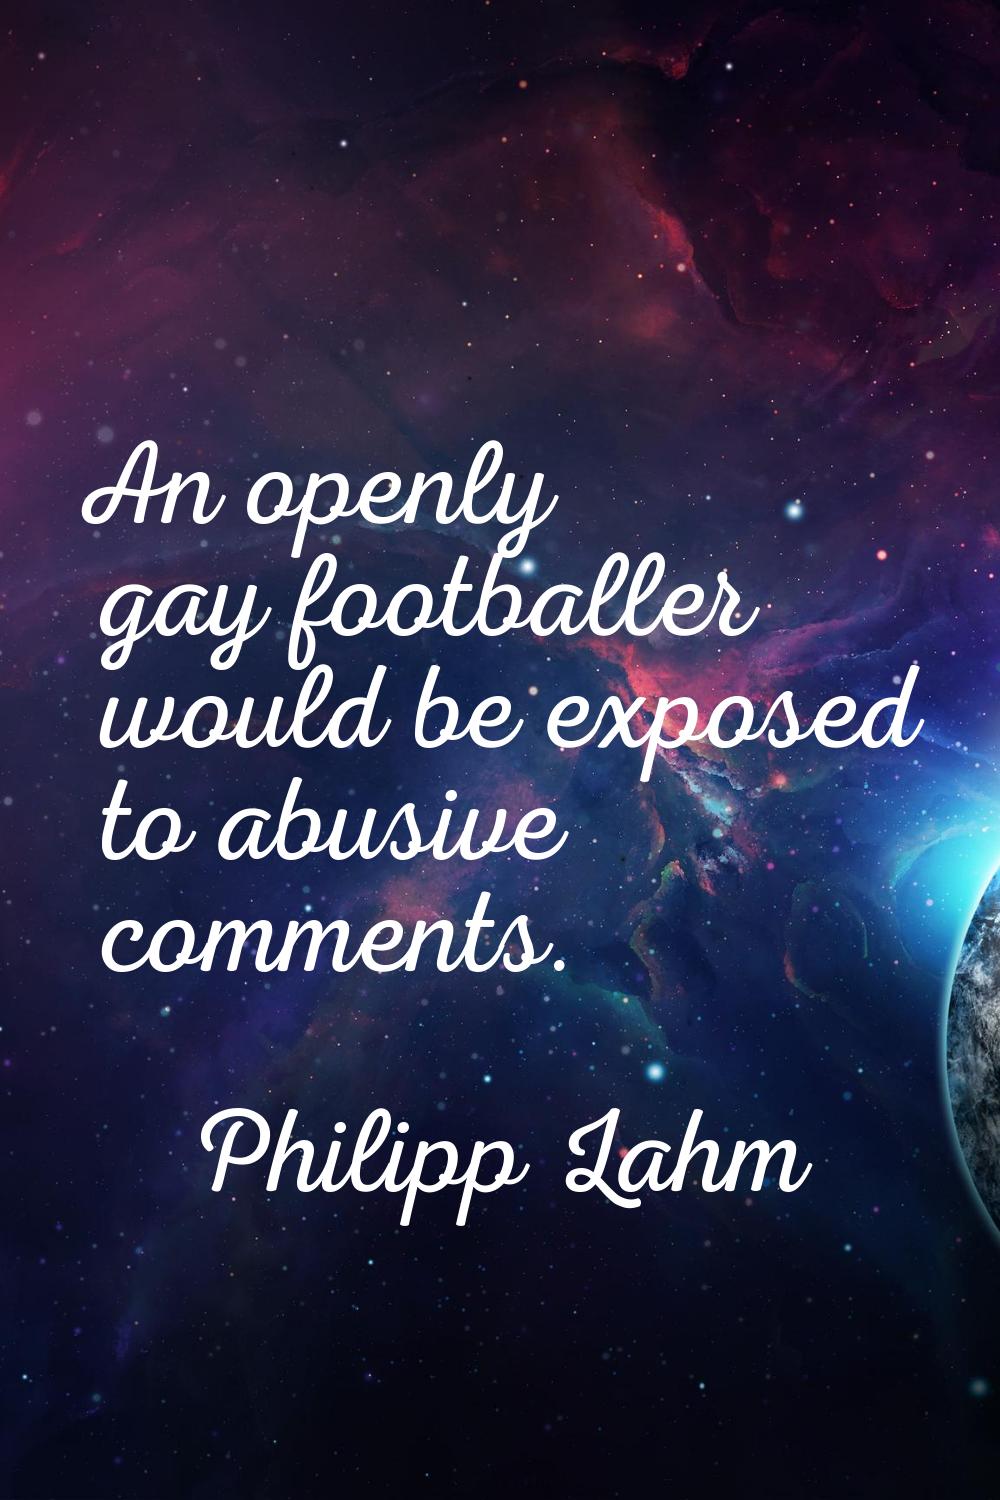 An openly gay footballer would be exposed to abusive comments.